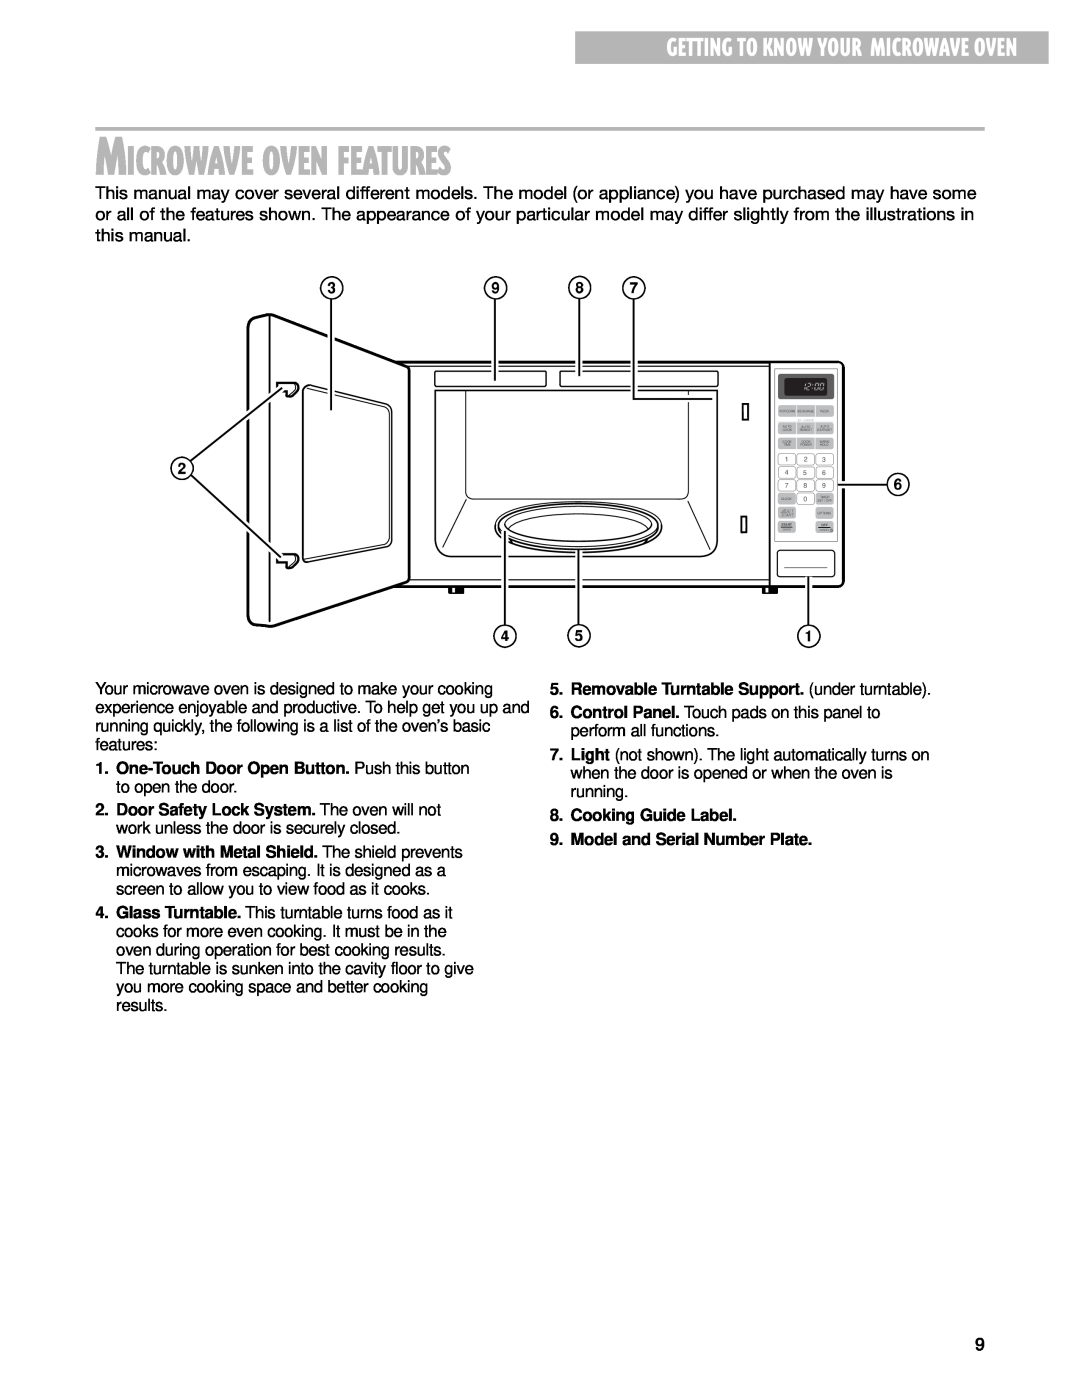 Whirlpool MT4210SL installation instructions Microwave Oven Features, Getting To Know Your Microwave Oven 